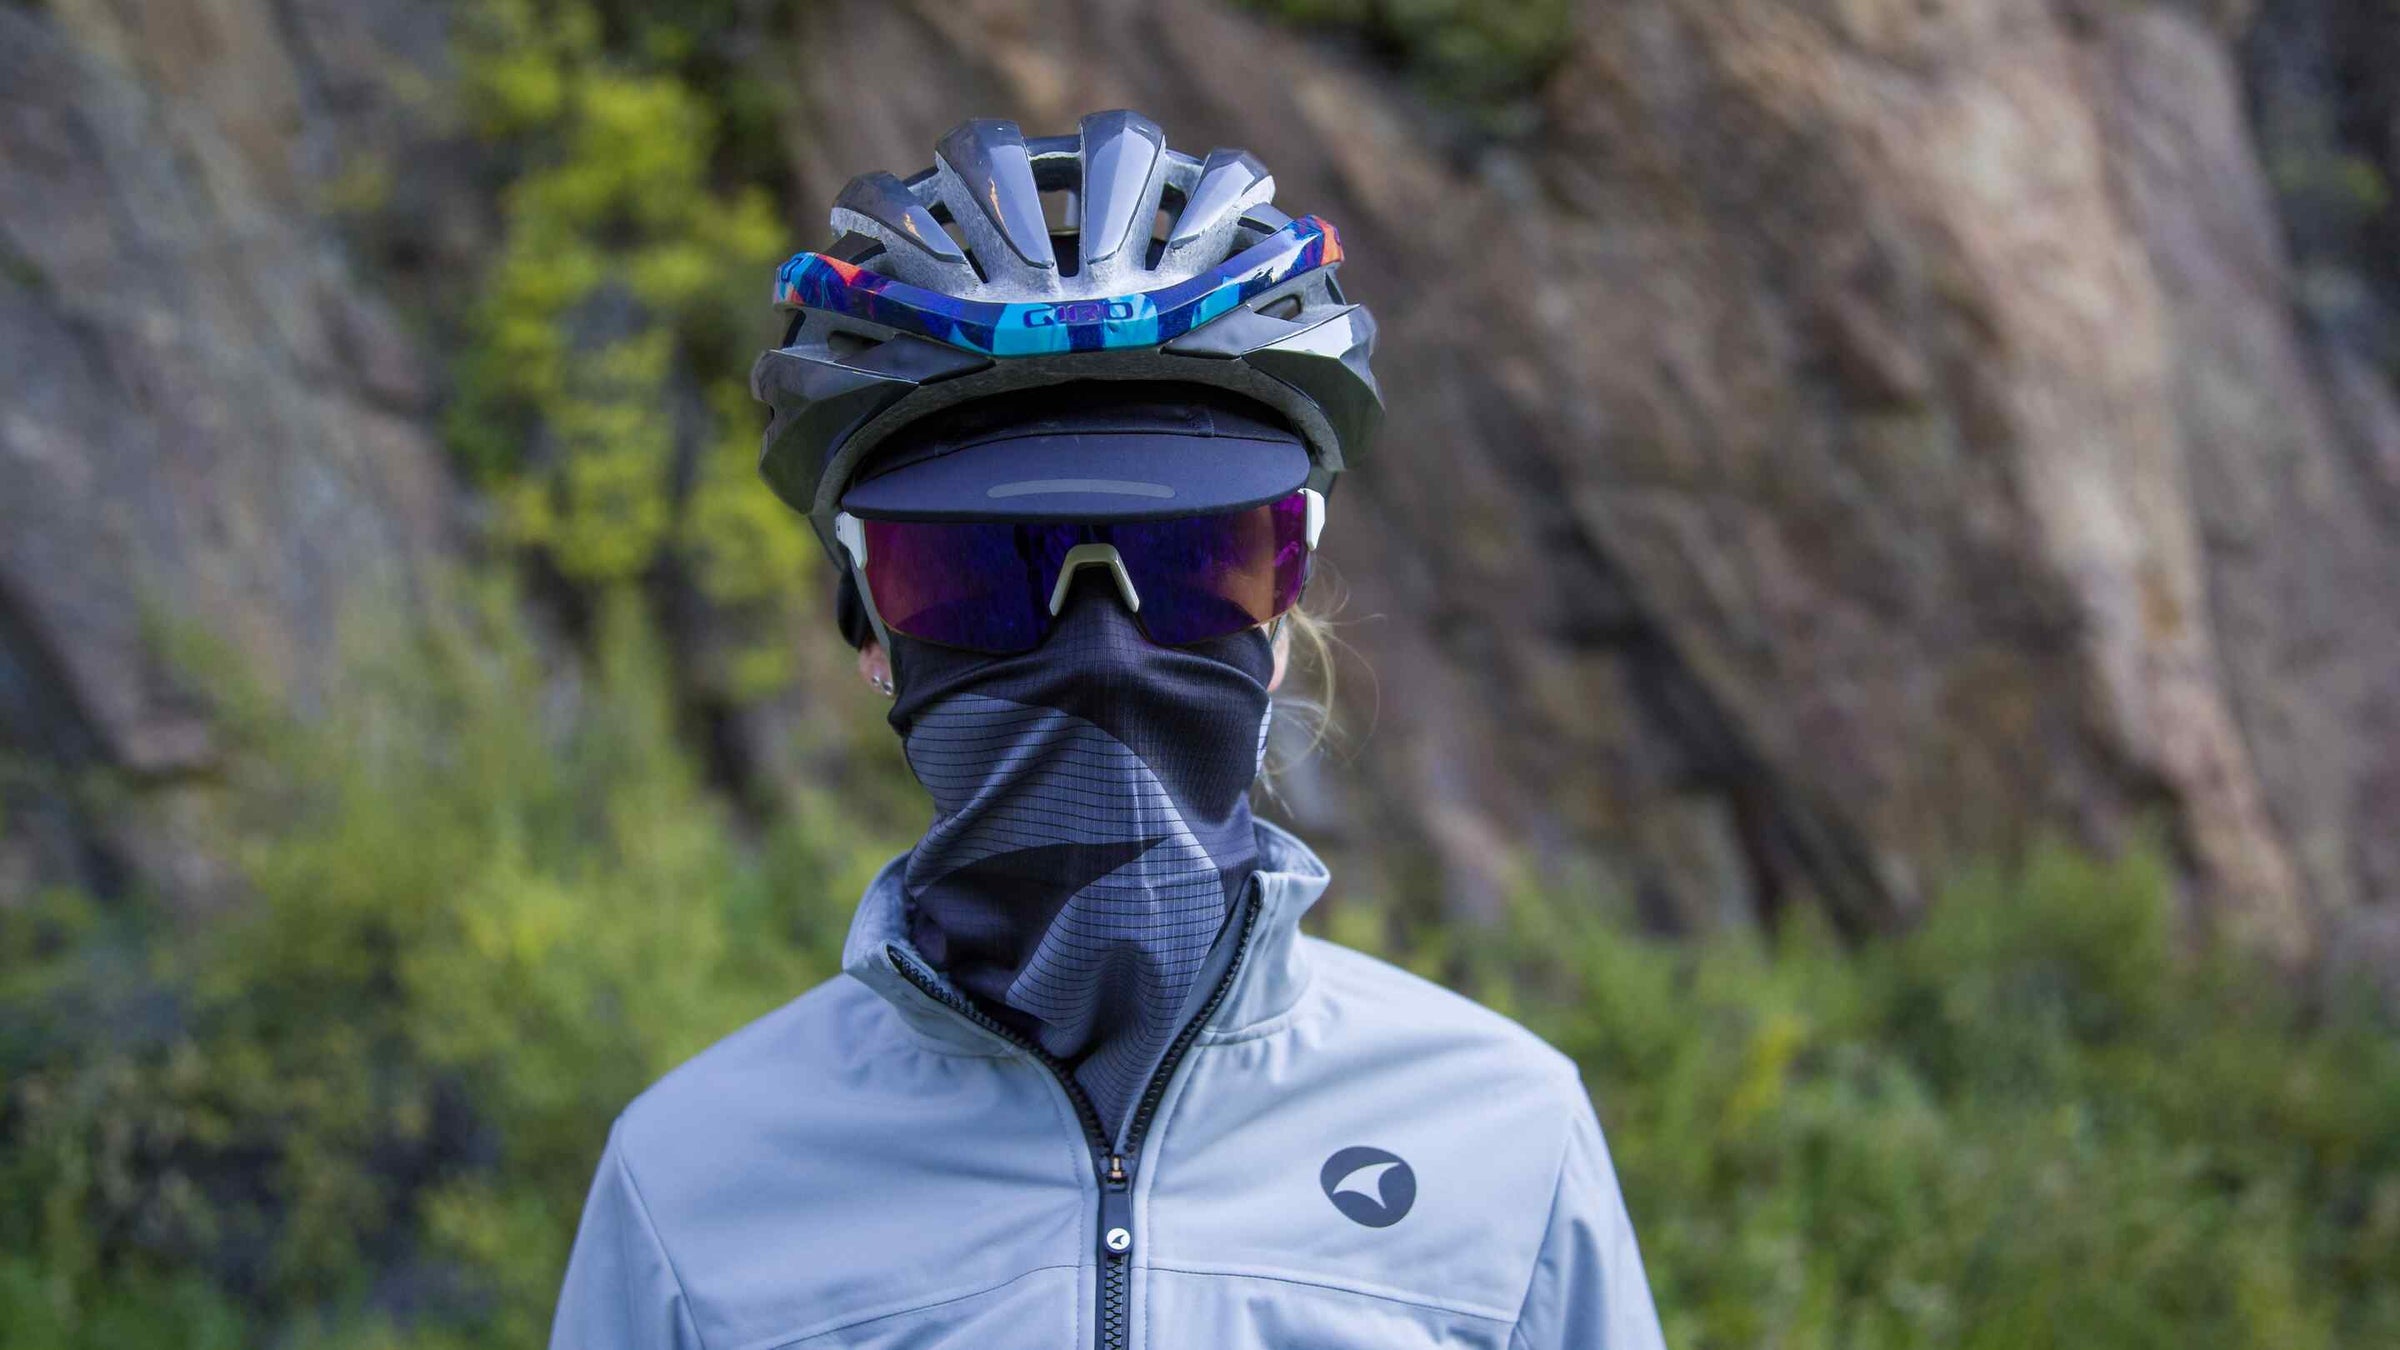 Pactimo Cycling Accessories for Women; base layers, caps, socks, and gloves